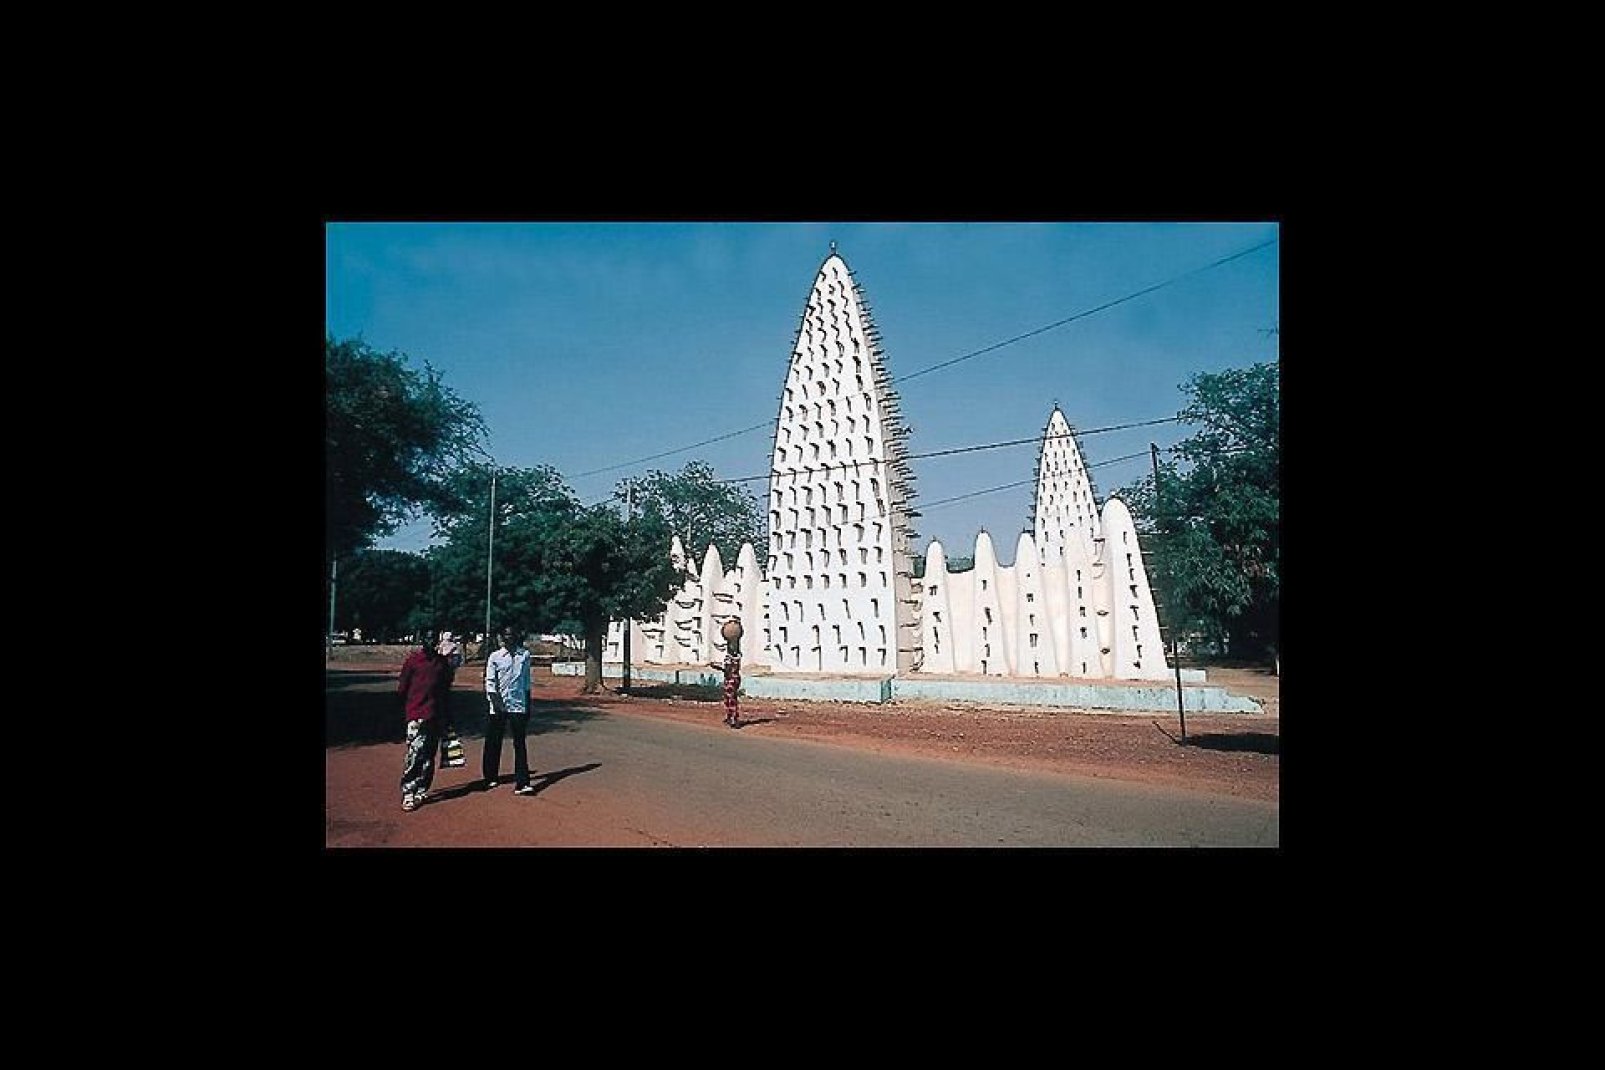 Bobo-Dioulasso is located in the southwestern part of the country and is the second largest city after the capital.